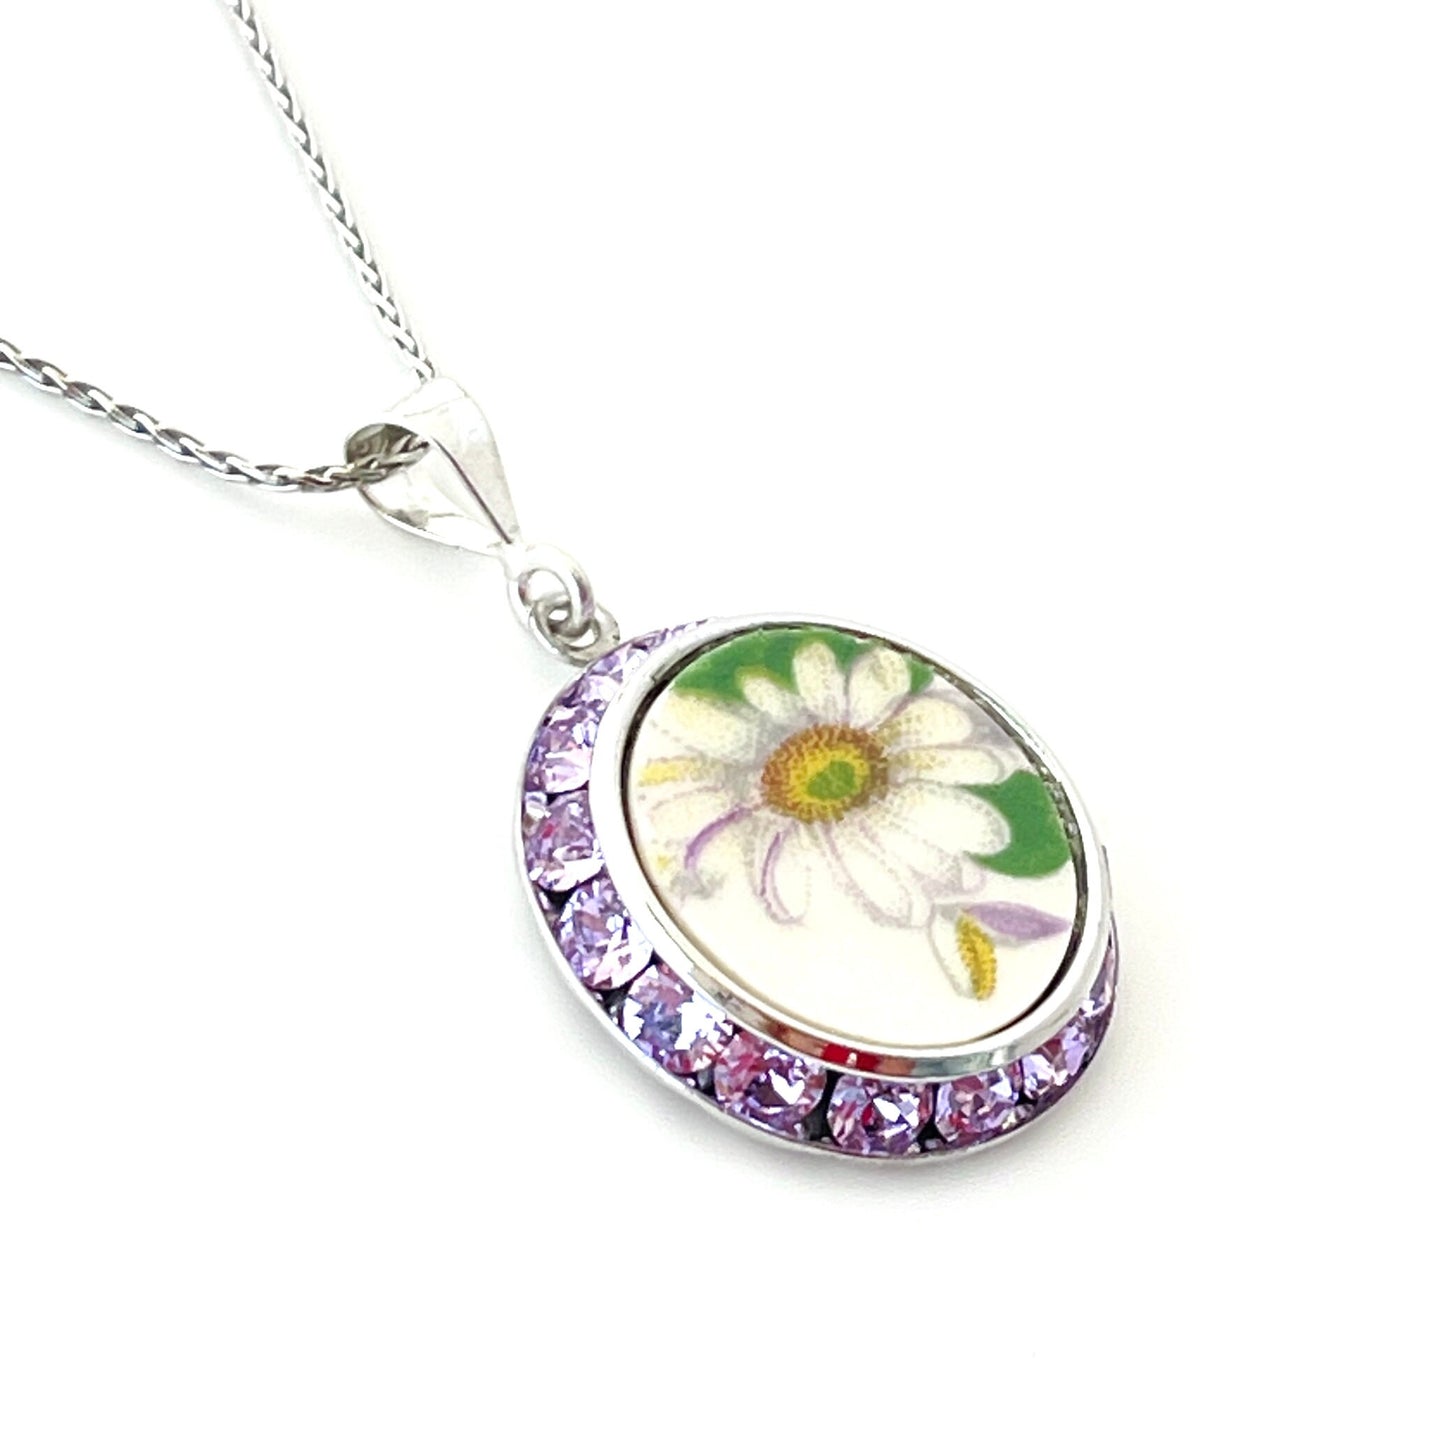 Broken China Jewelry Pendant Necklace, Crystal Daisy Necklace, Unique Gifts for Women, Birthday Gift for Her